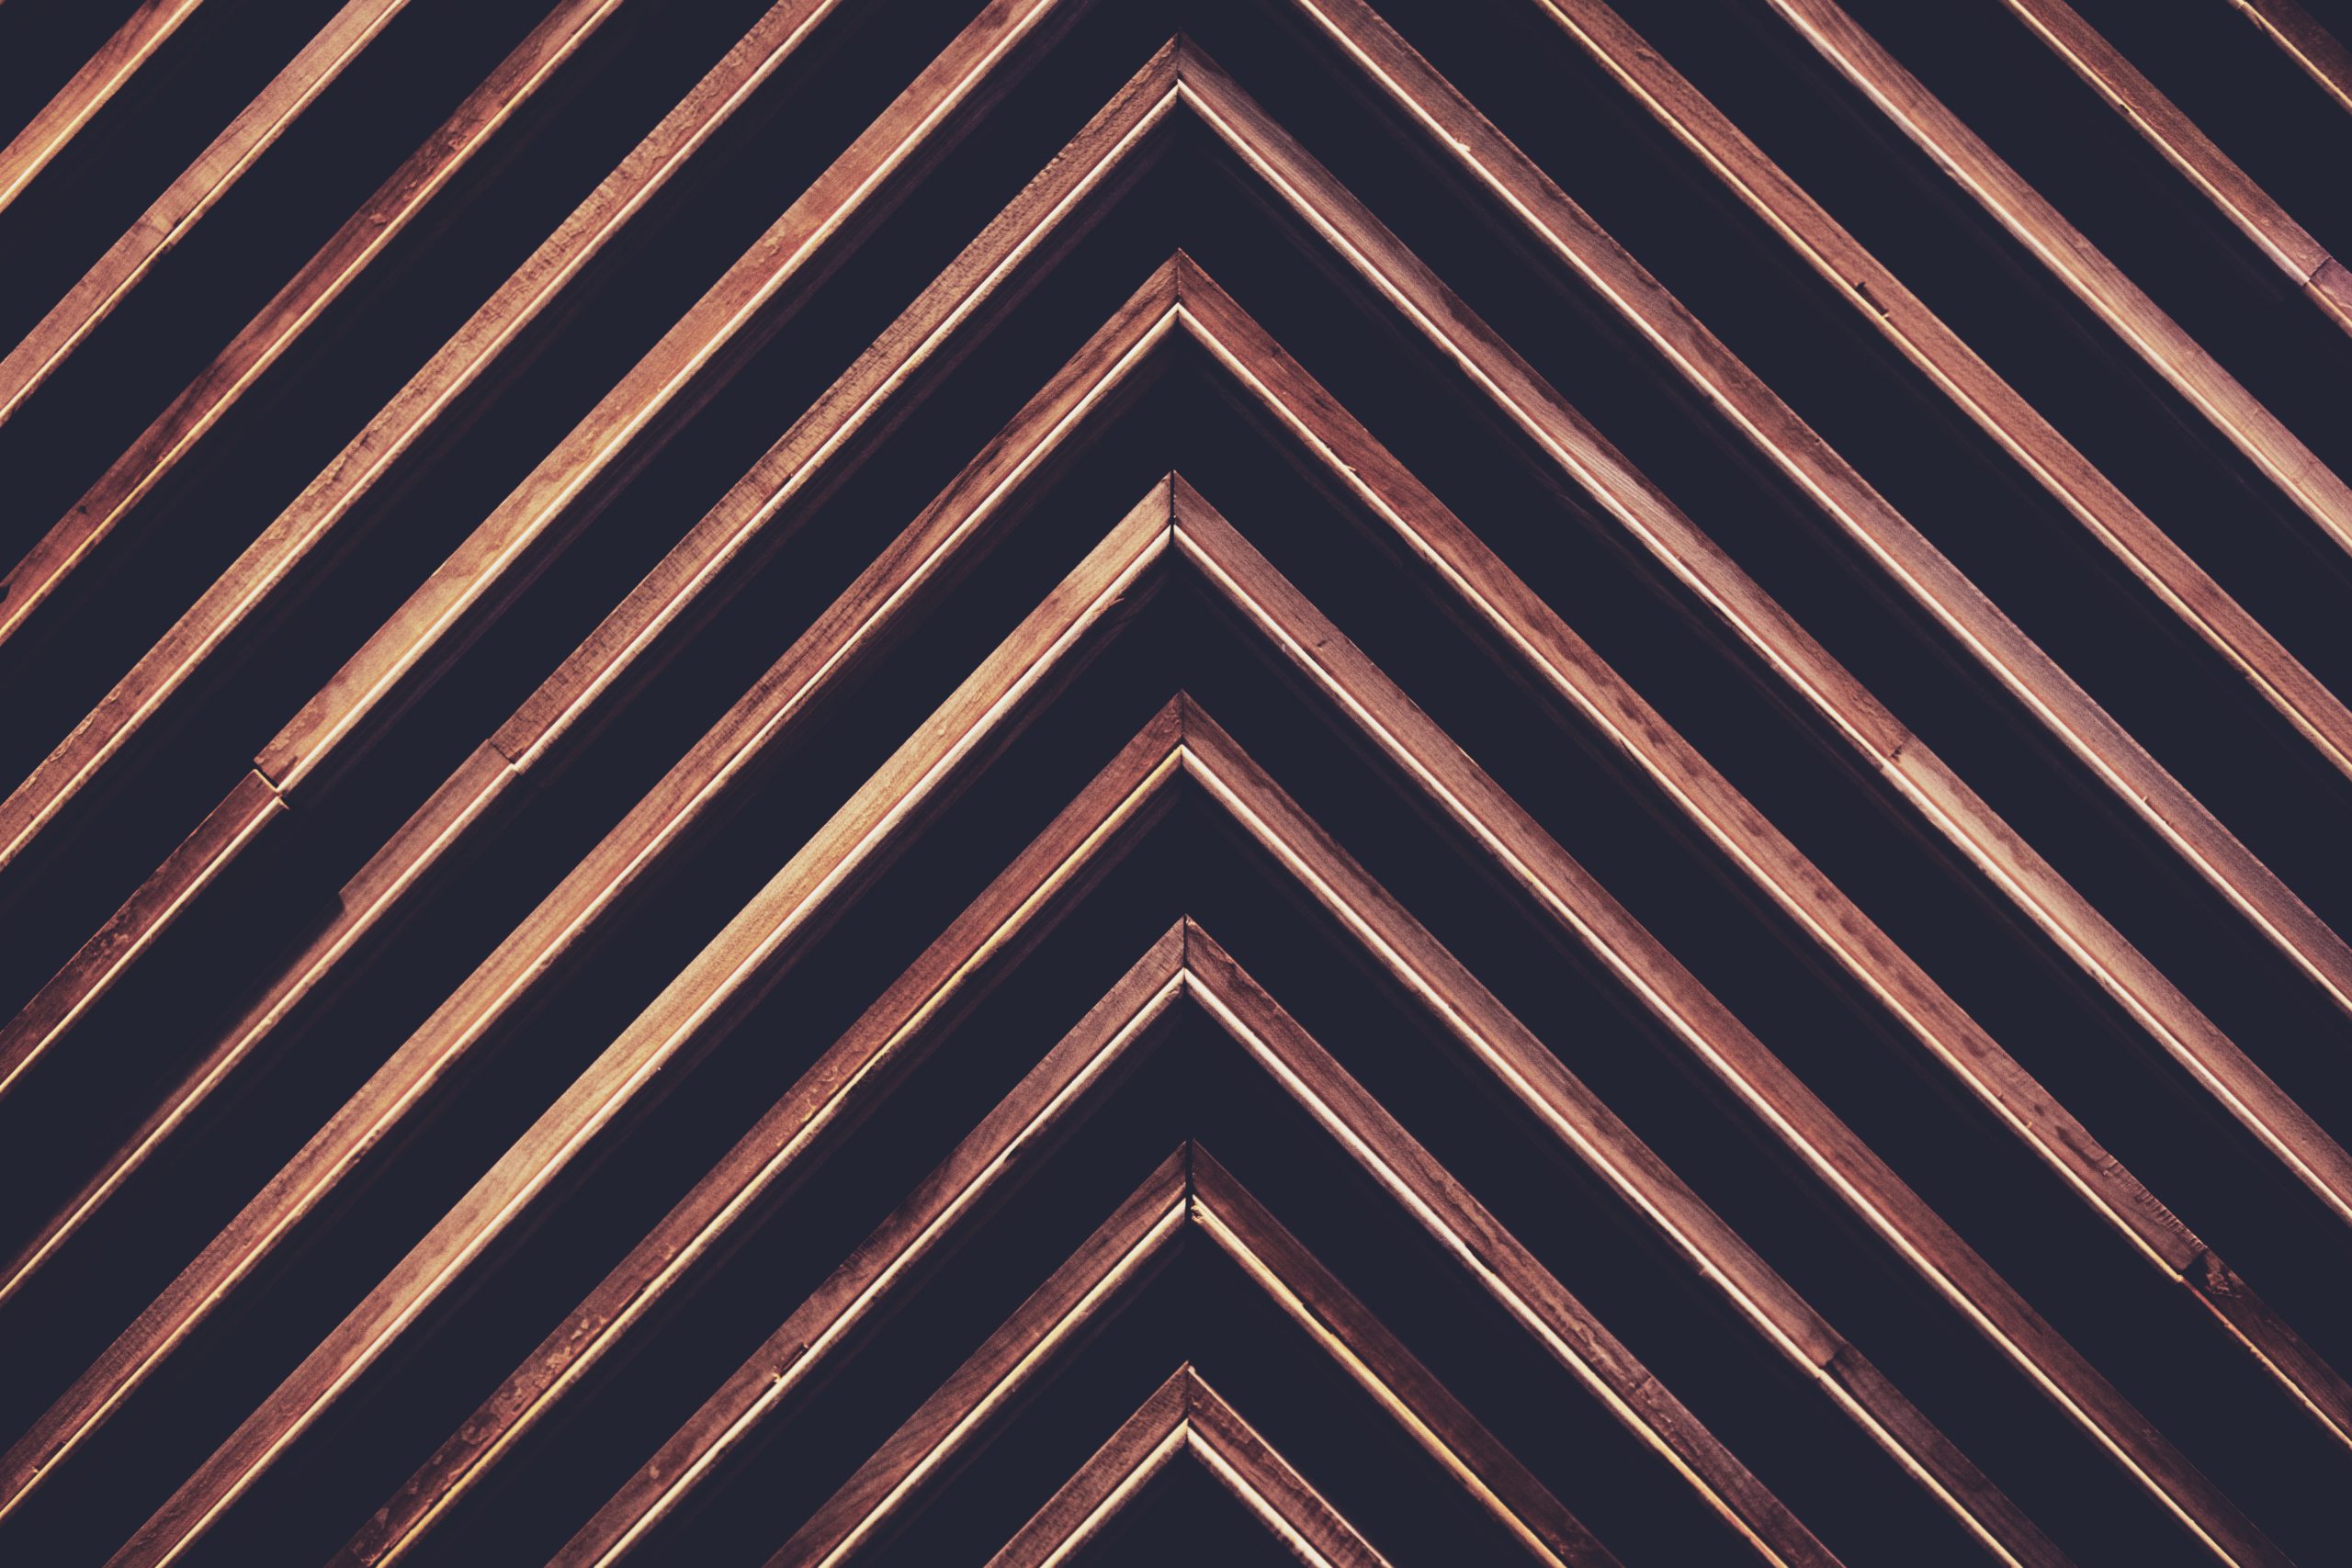 pieces of darker wood angled up against a black wall to make an arrow